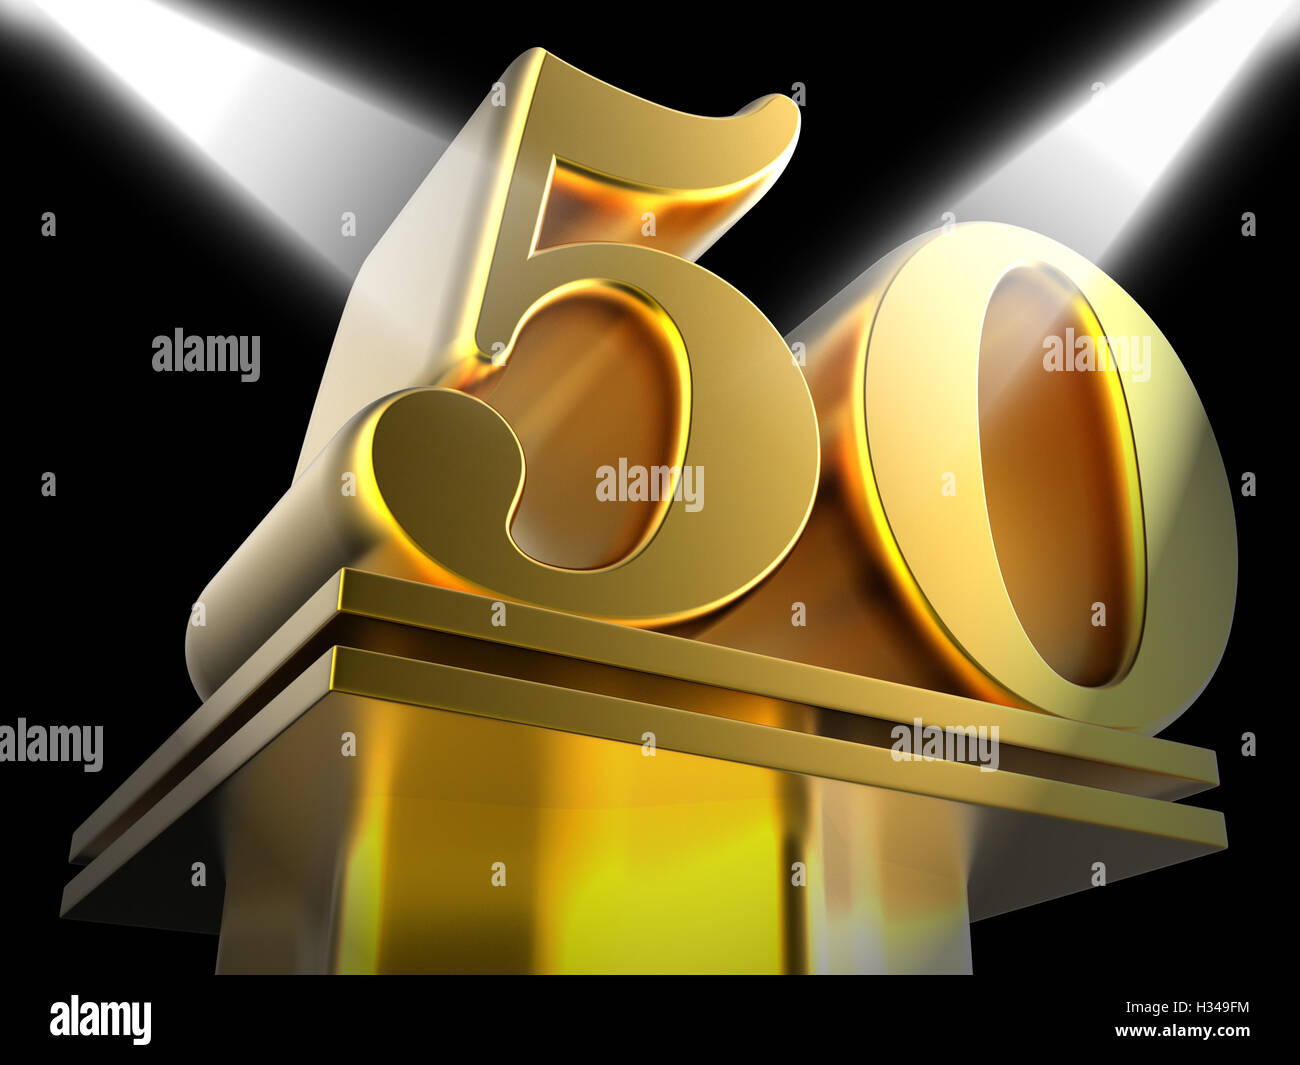 Golden Fifty On Pedestal Means Movie Awards Or Recognition Stock Photo